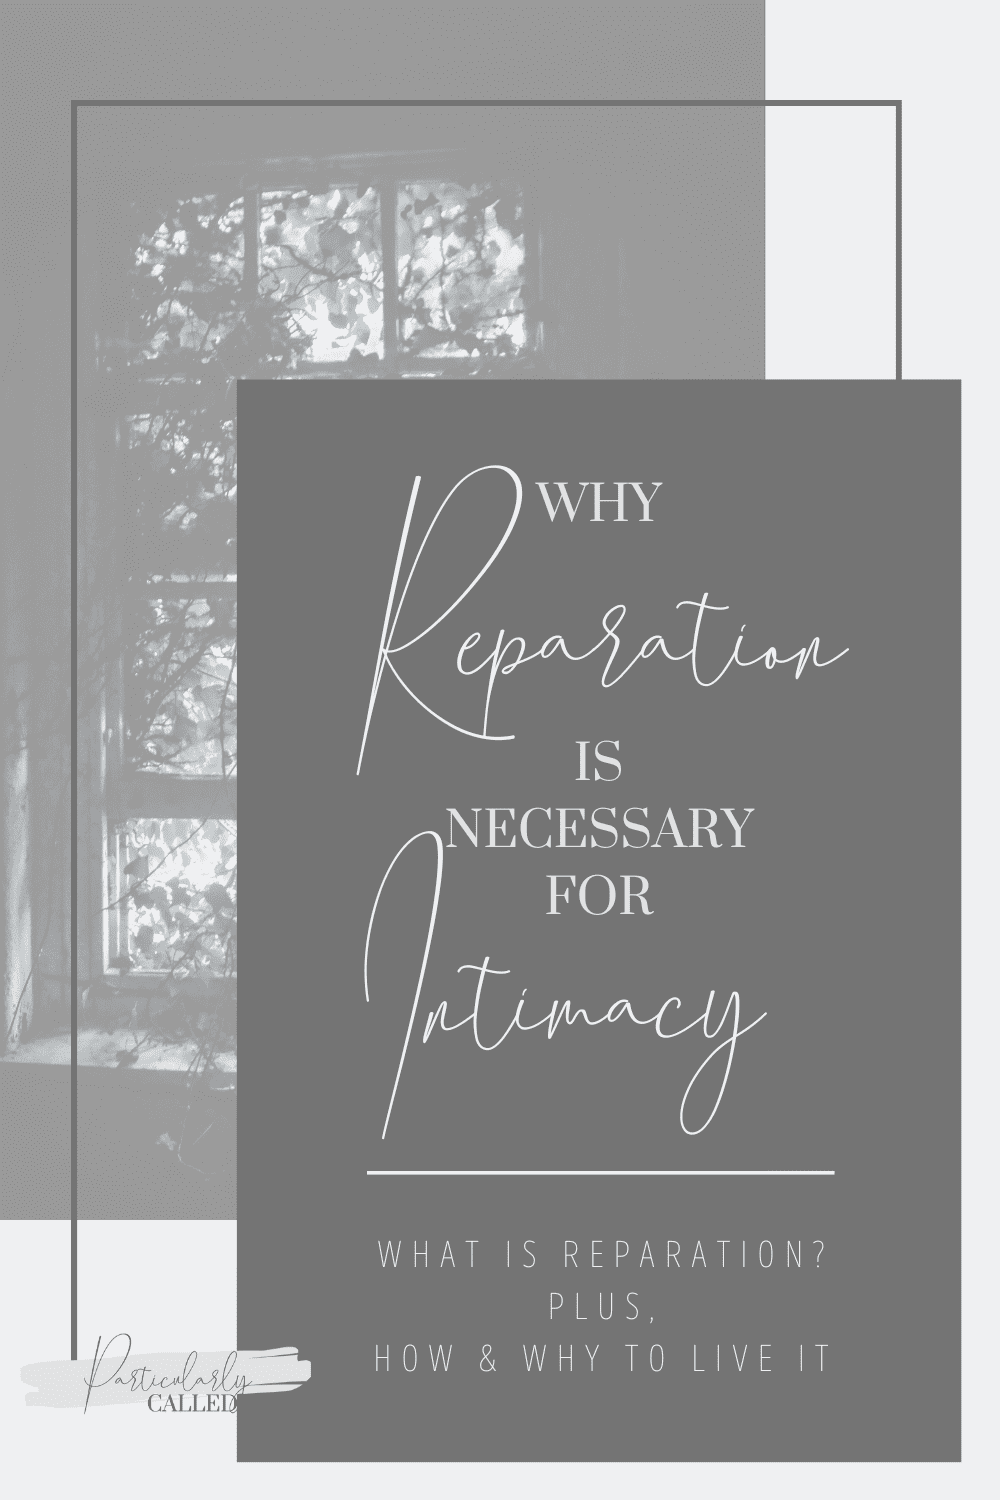 Why Reparation is Necessary for Intimacy